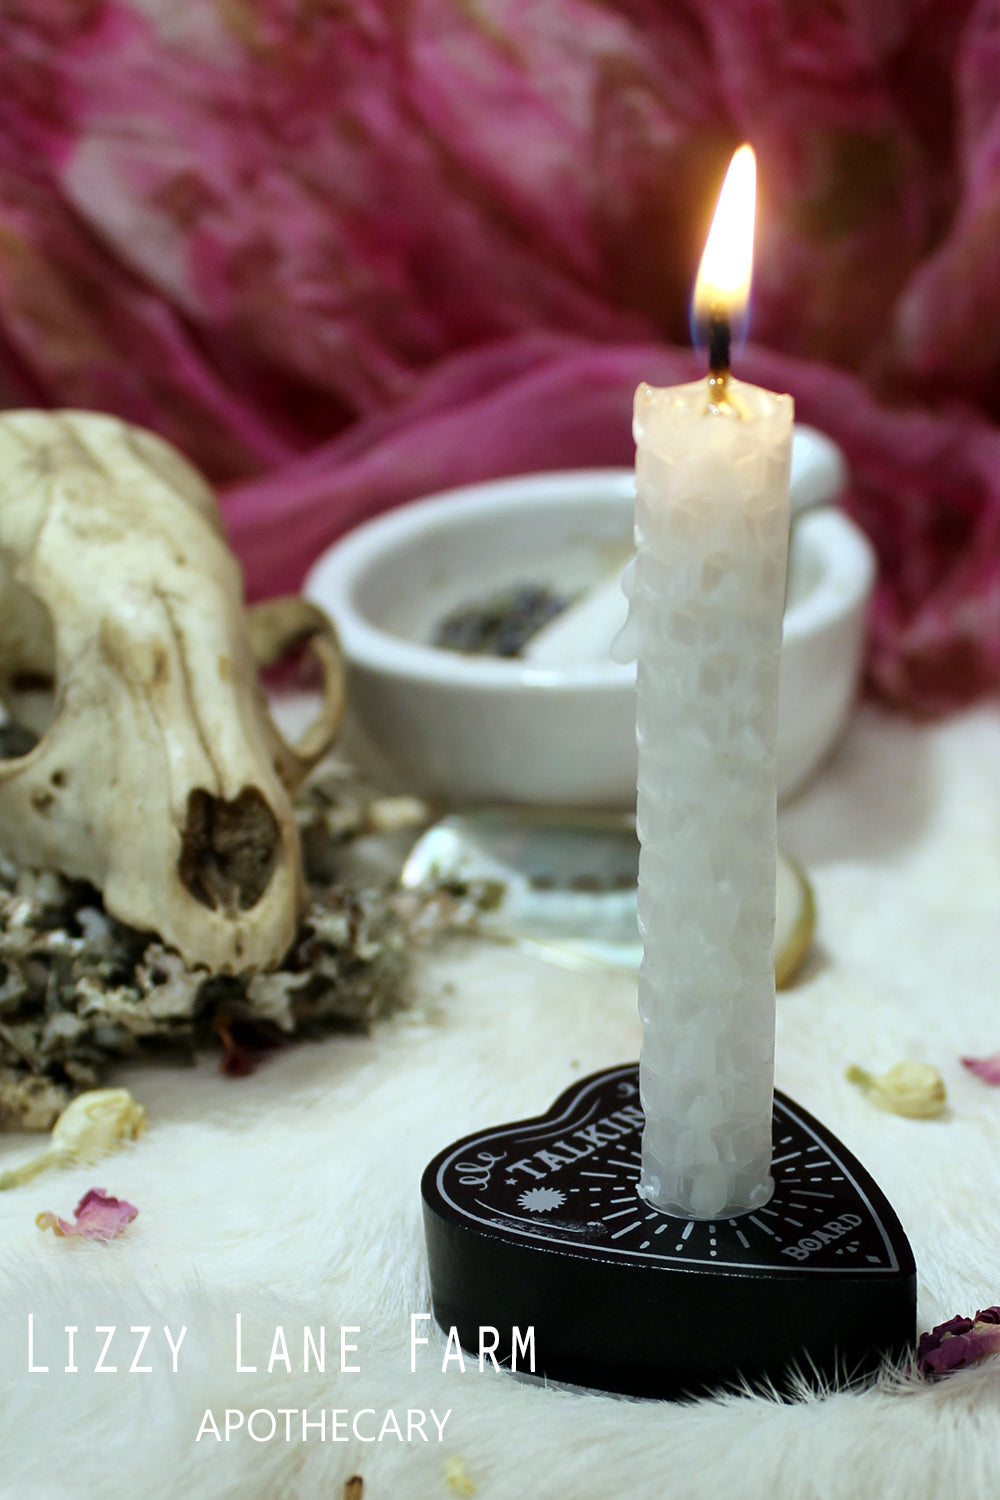 Hand-rolled Beeswax Ritual Candle Set with Planchette Ritual Candle Holder, Incense Matches